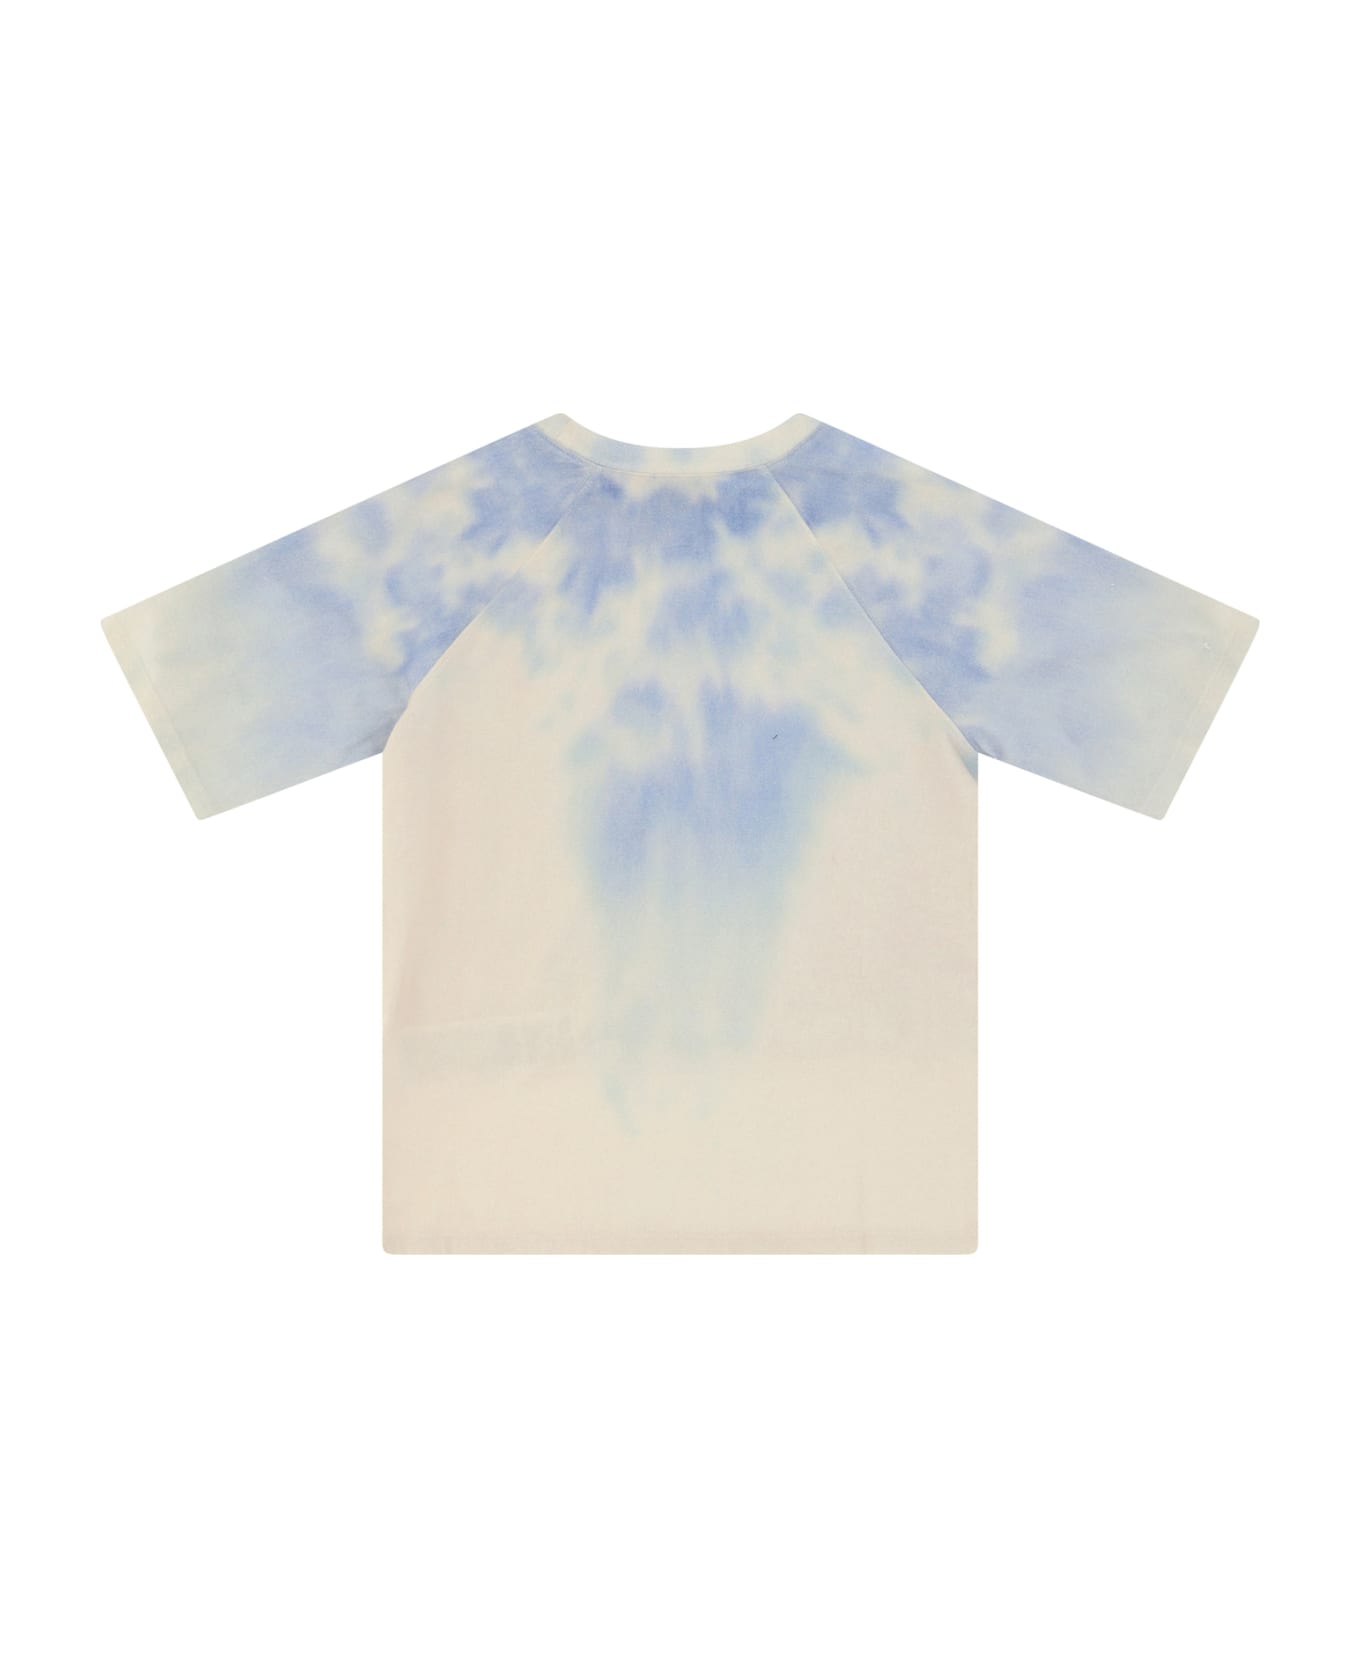 Gucci T-shirt For Boy - Dusty White/blue